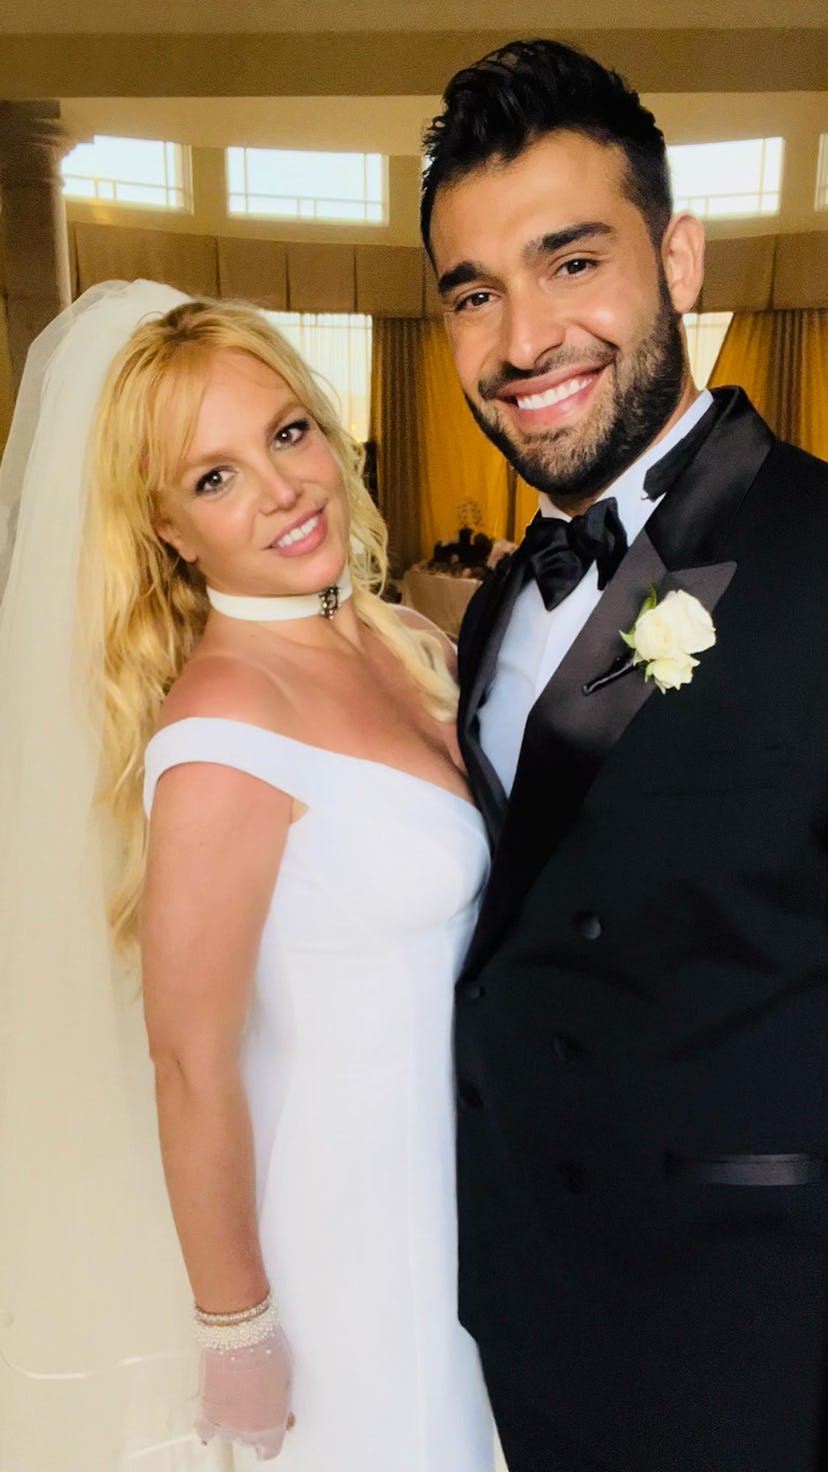 Britney Spears and Sam Asghari's wedding guests included Madonna, Paris Hilton, Selena Gomez, and Dr...